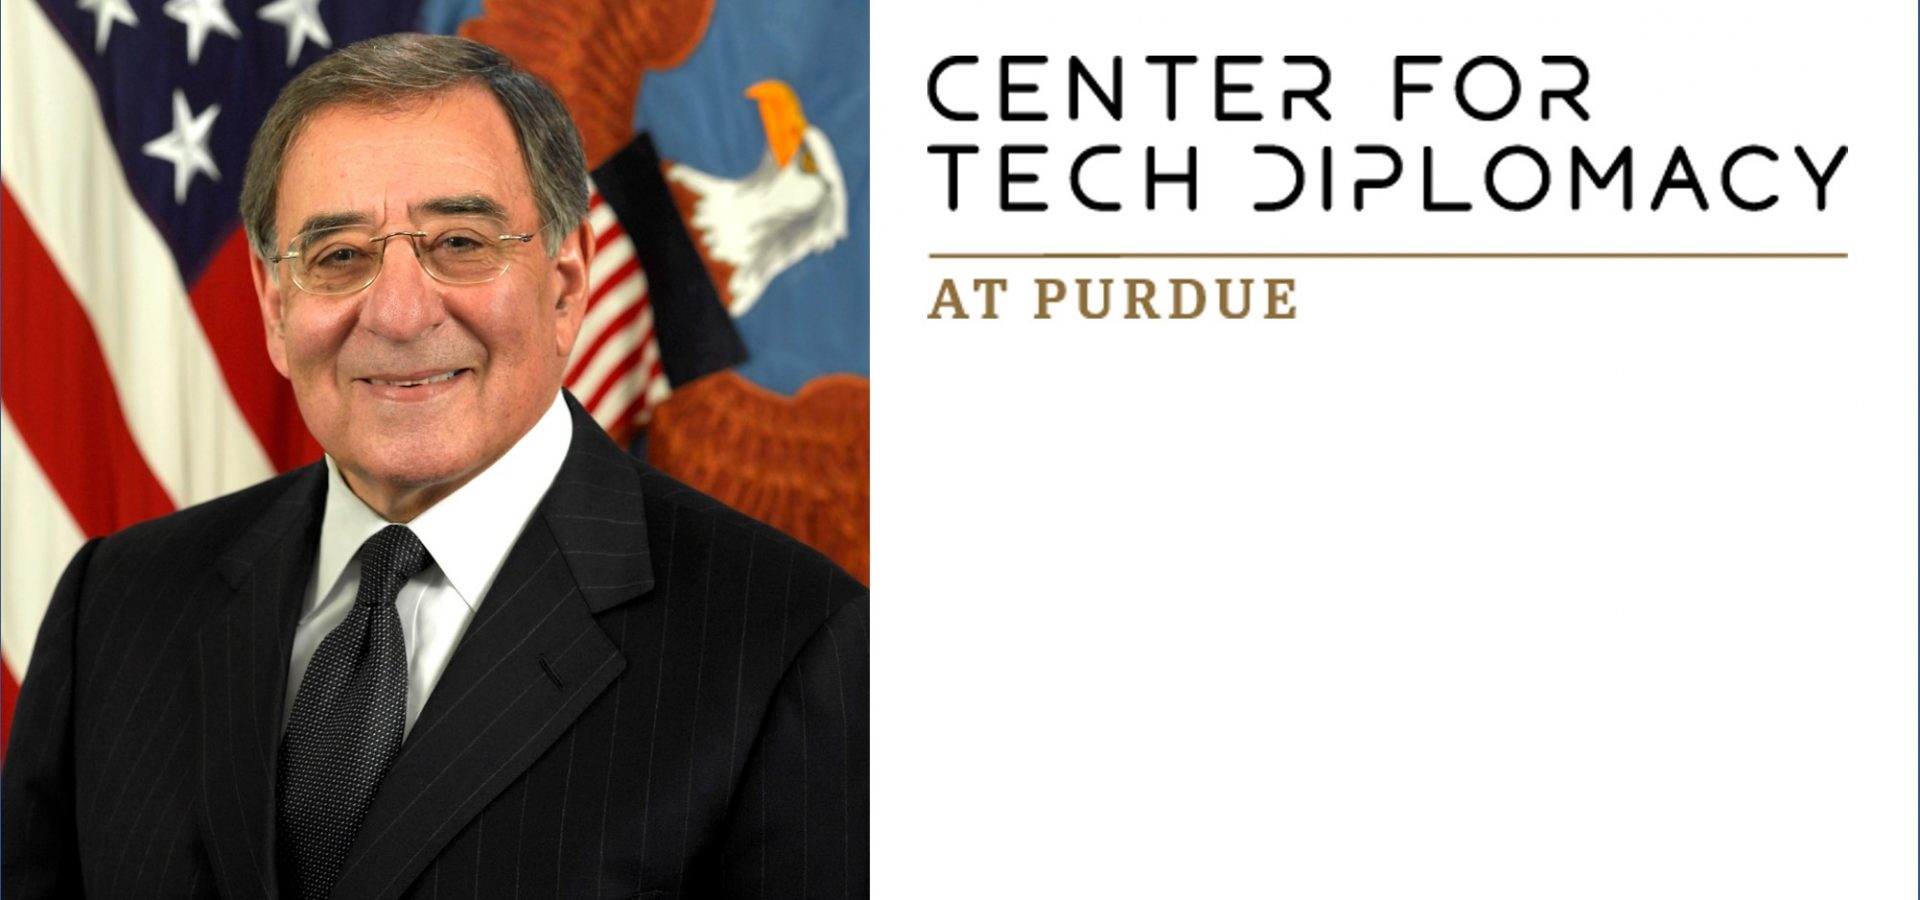 Leon Panetta, Former Defense Secretary and CIA Director, Joins Center for Tech Diplomacy at Purdue Advisory Board